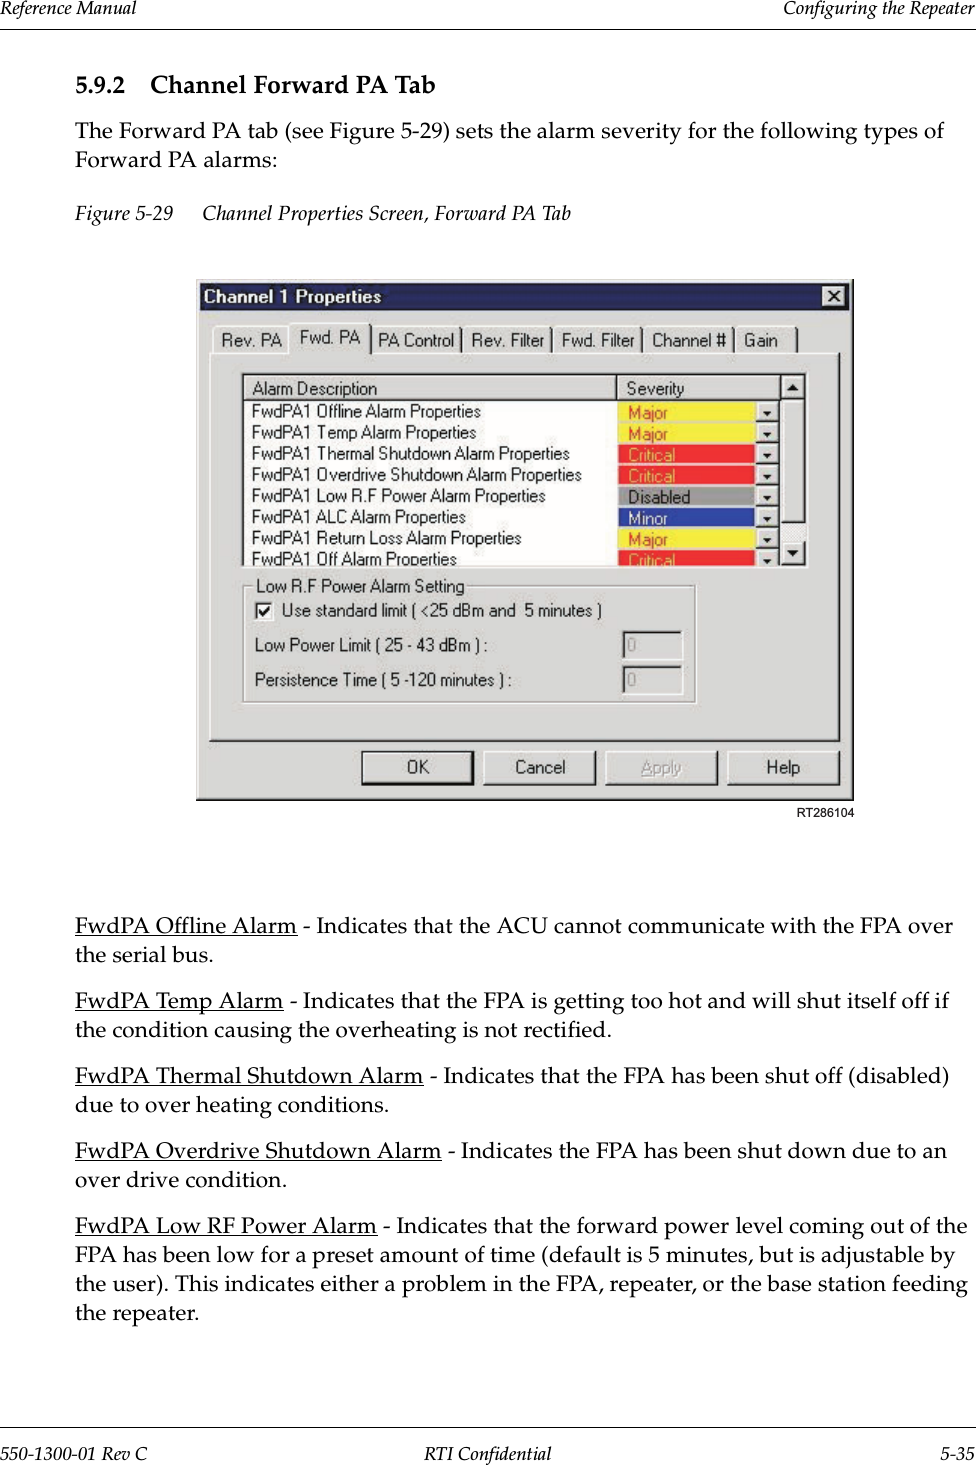 Reference Manual     Configuring the Repeater550-1300-01 Rev C RTI Confidential 5-355.9.2 Channel Forward PA TabThe Forward PA tab (see Figure 5-29) sets the alarm severity for the following types of Forward PA alarms:Figure 5-29 Channel Properties Screen, Forward PA TabFwdPA Offline Alarm - Indicates that the ACU cannot communicate with the FPA over the serial bus.FwdPA Temp Alarm - Indicates that the FPA is getting too hot and will shut itself off if the condition causing the overheating is not rectified.FwdPA Thermal Shutdown Alarm - Indicates that the FPA has been shut off (disabled) due to over heating conditions.FwdPA Overdrive Shutdown Alarm - Indicates the FPA has been shut down due to an over drive condition.FwdPA Low RF Power Alarm - Indicates that the forward power level coming out of the FPA has been low for a preset amount of time (default is 5 minutes, but is adjustable by the user). This indicates either a problem in the FPA, repeater, or the base station feeding the repeater.RT286104